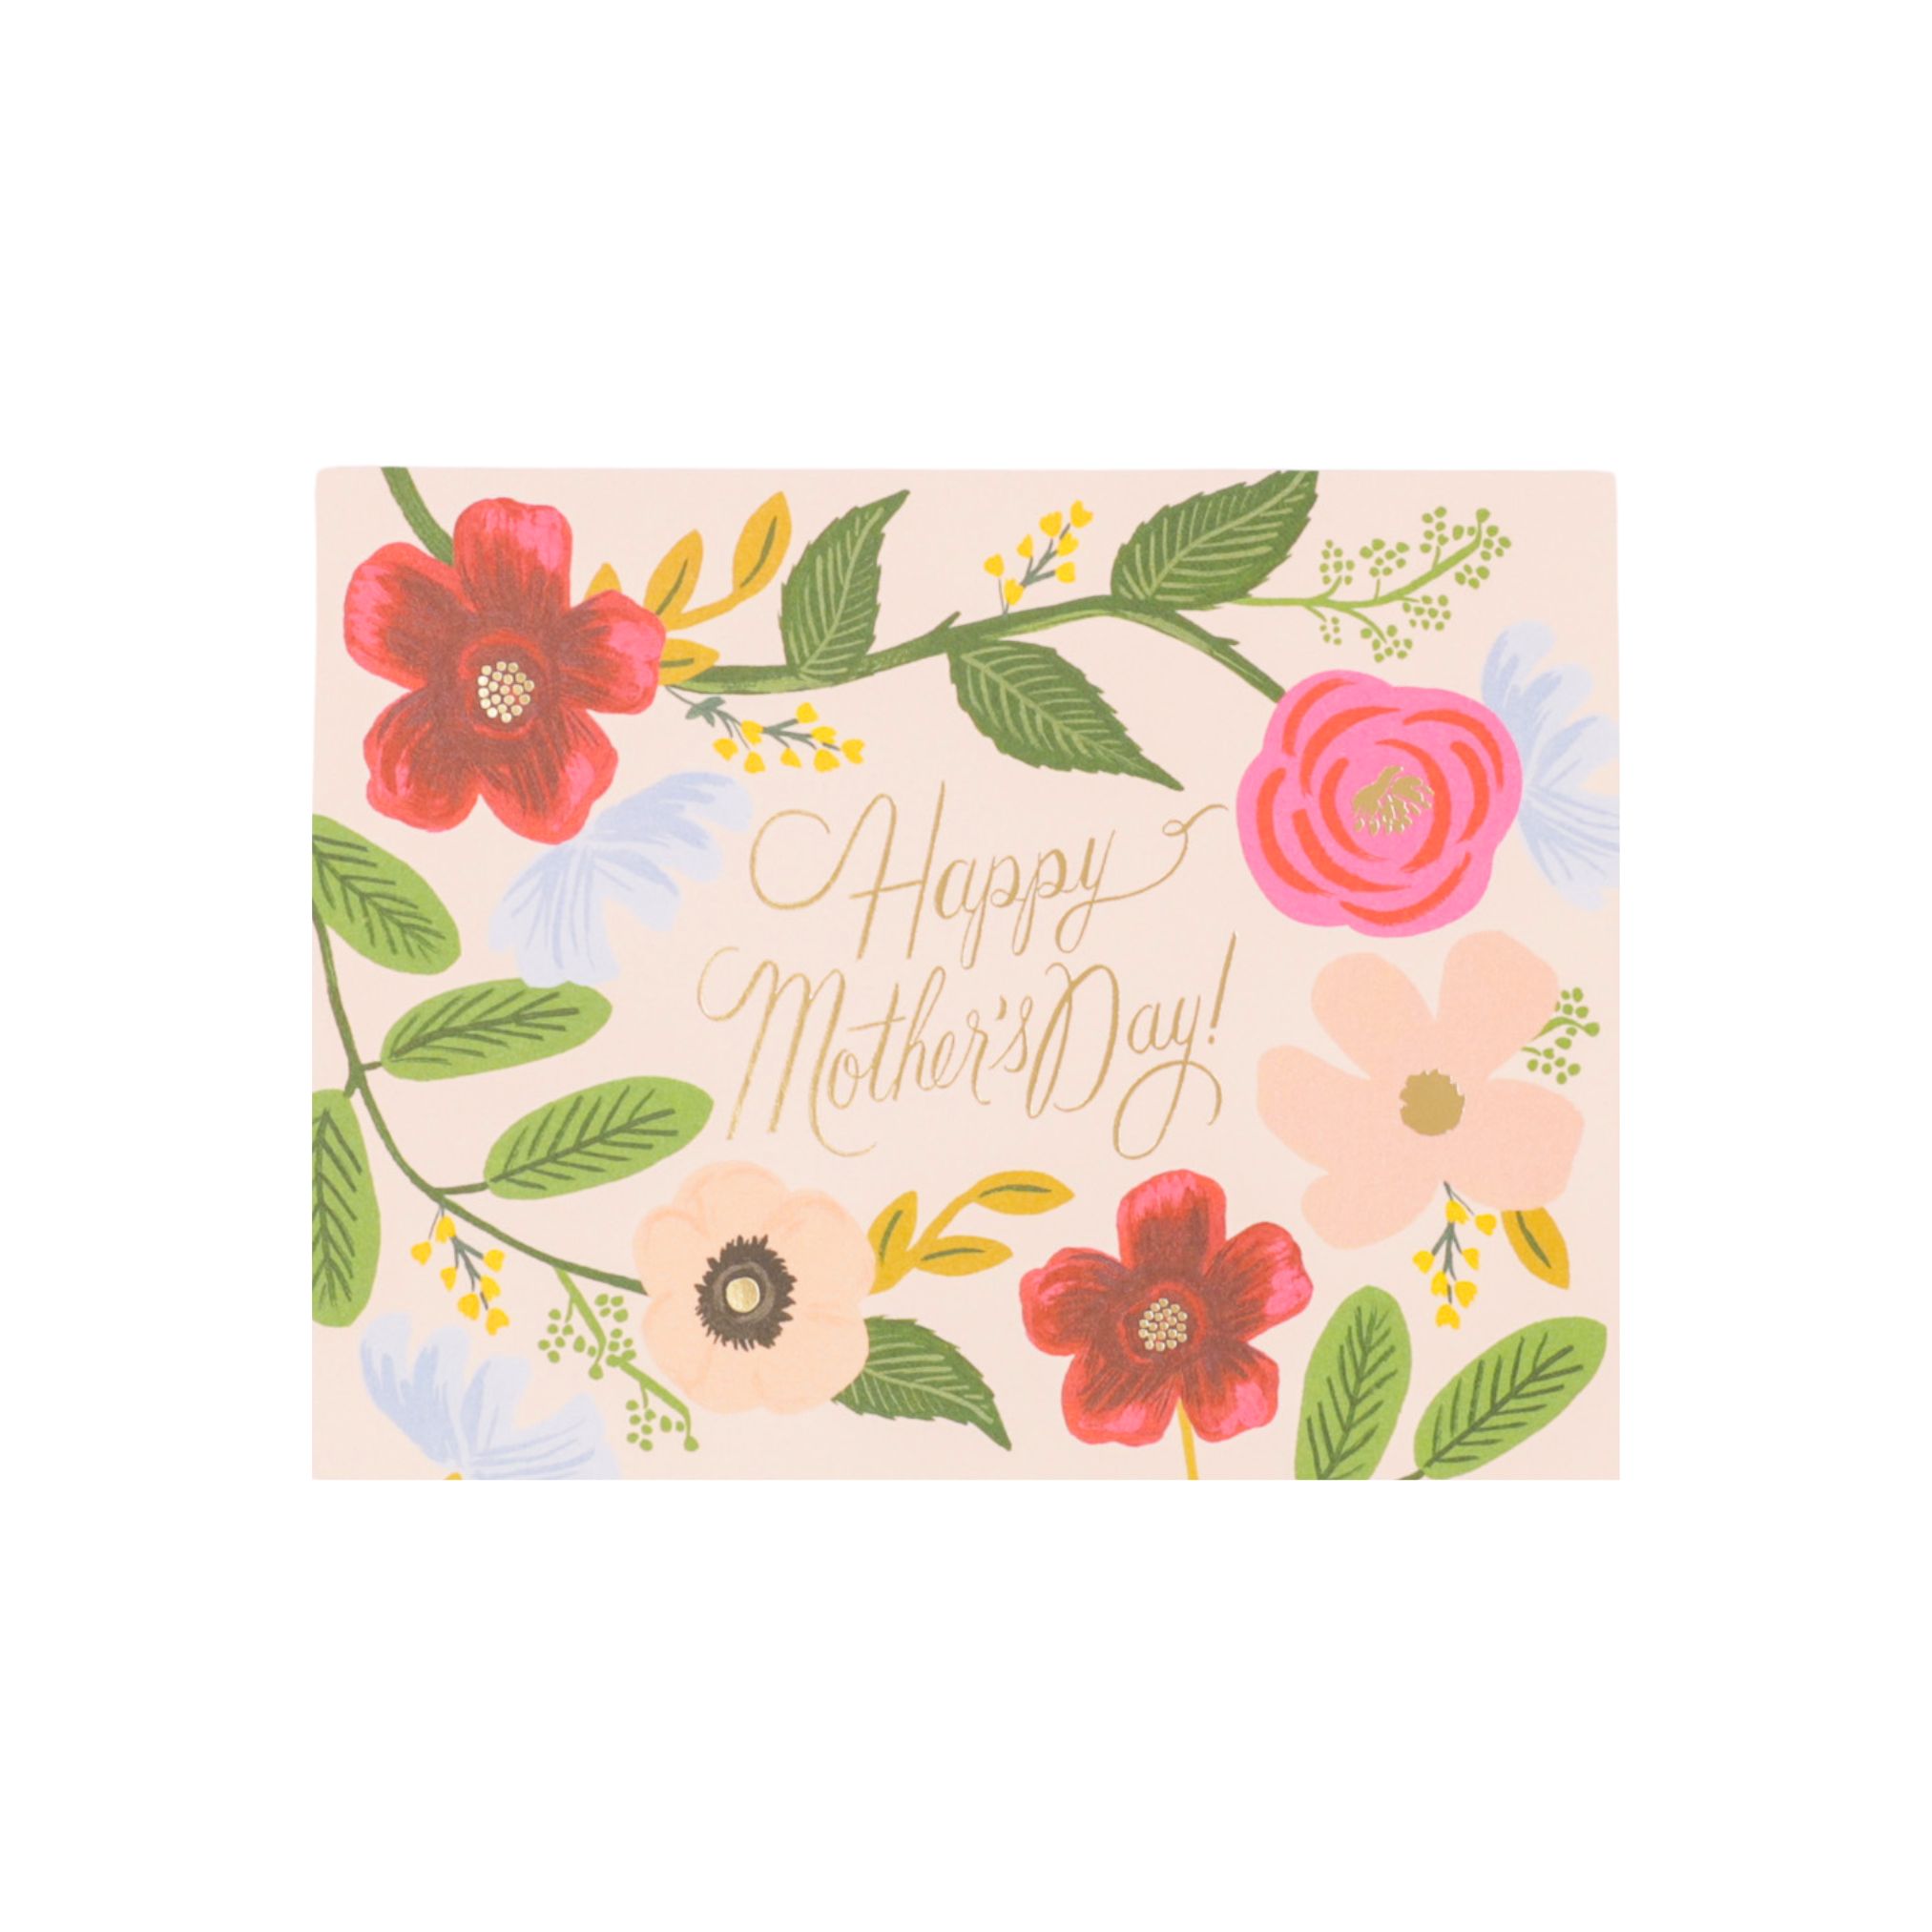 Wildflowers Mother's Day Card - Green Fresh Florals + Plants